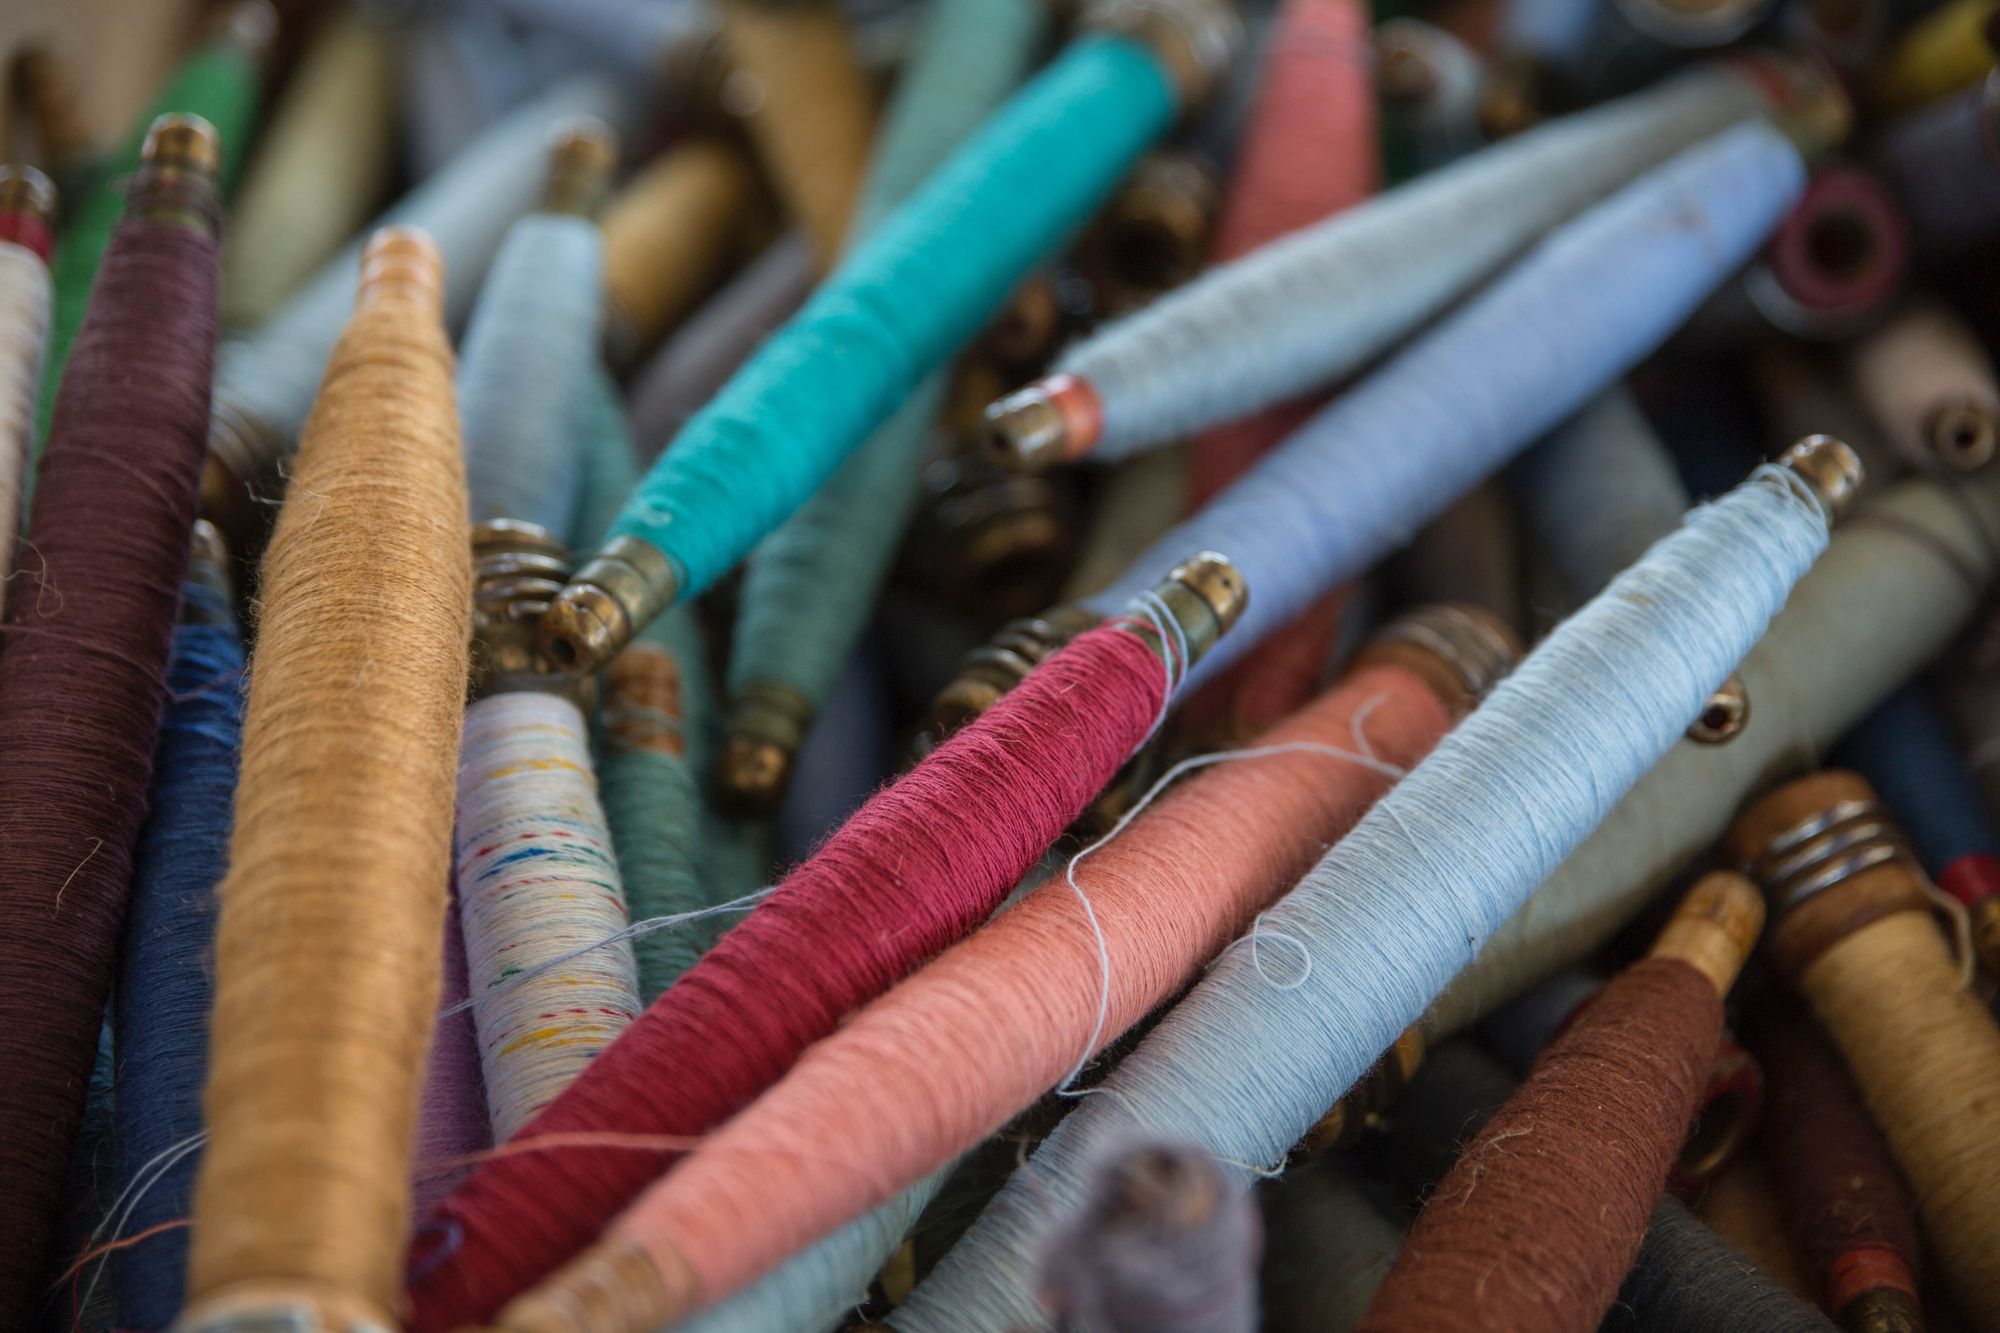 Threads and Fibers for Hand Embroidery